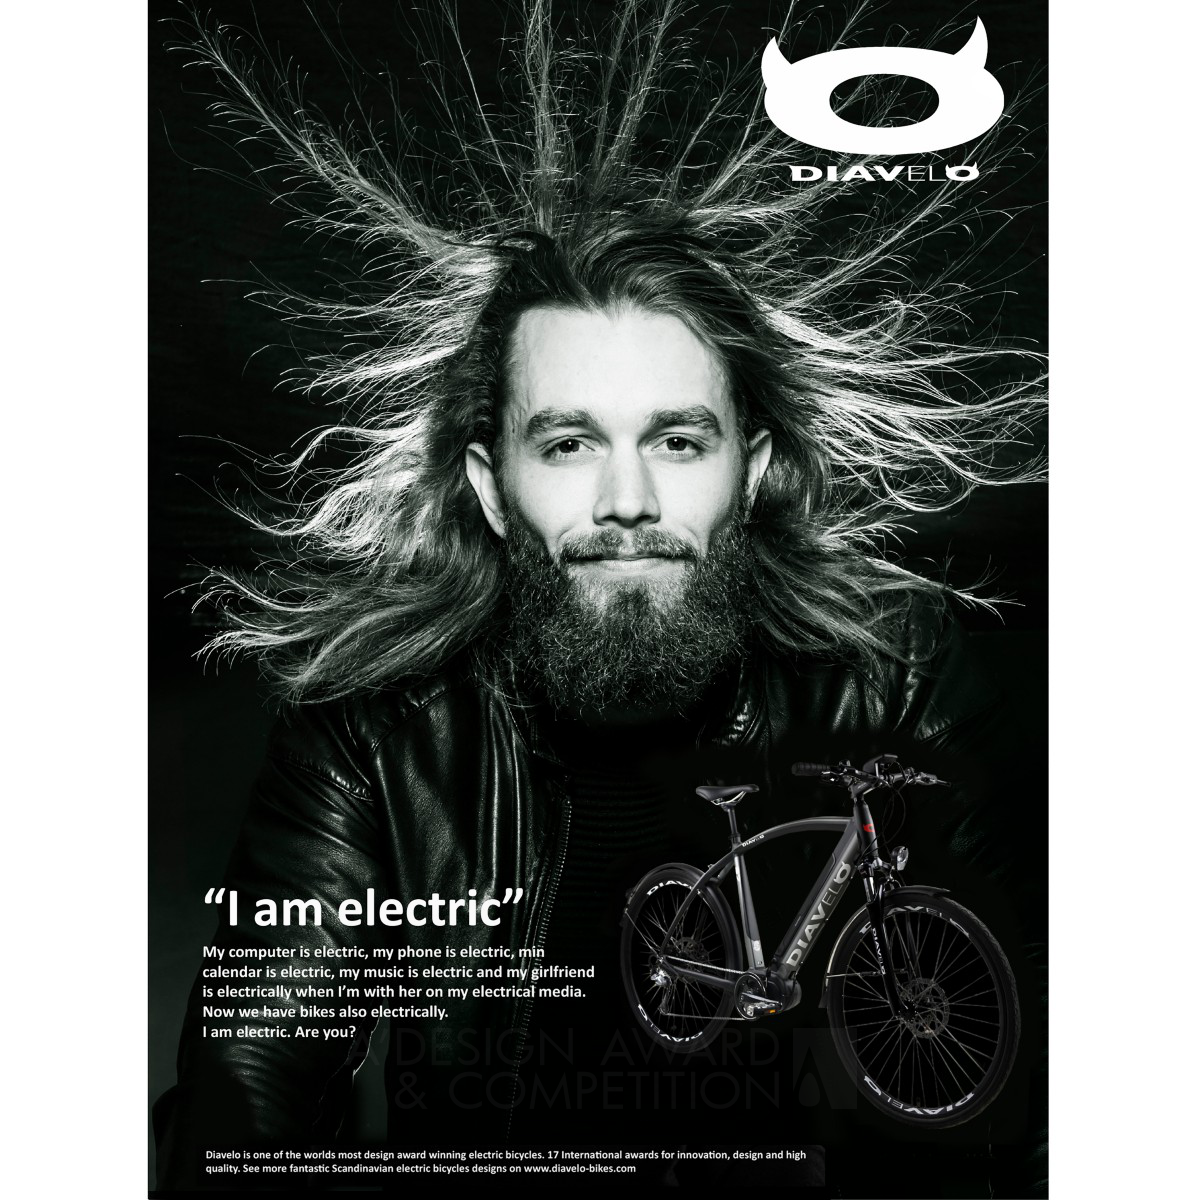 Diavelo's Electric Hair: A Revolution in Bicycle Advertising